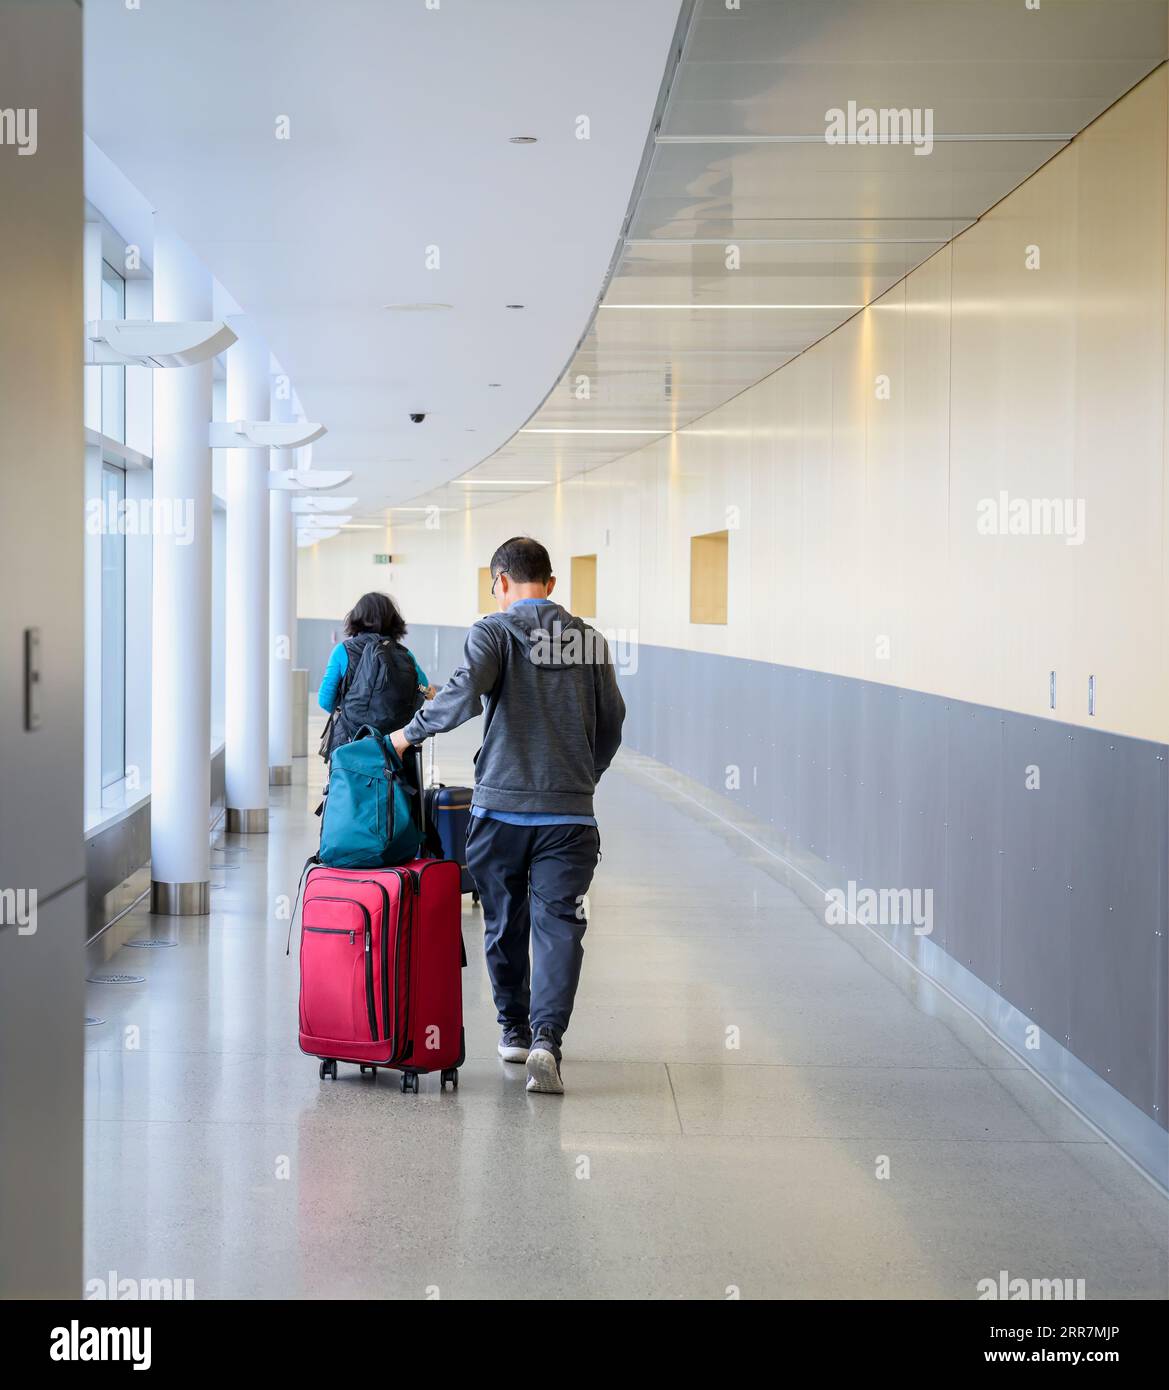 Couple pushing luggage bags at the airport, ready to board the flight. Vertical format. Stock Photo